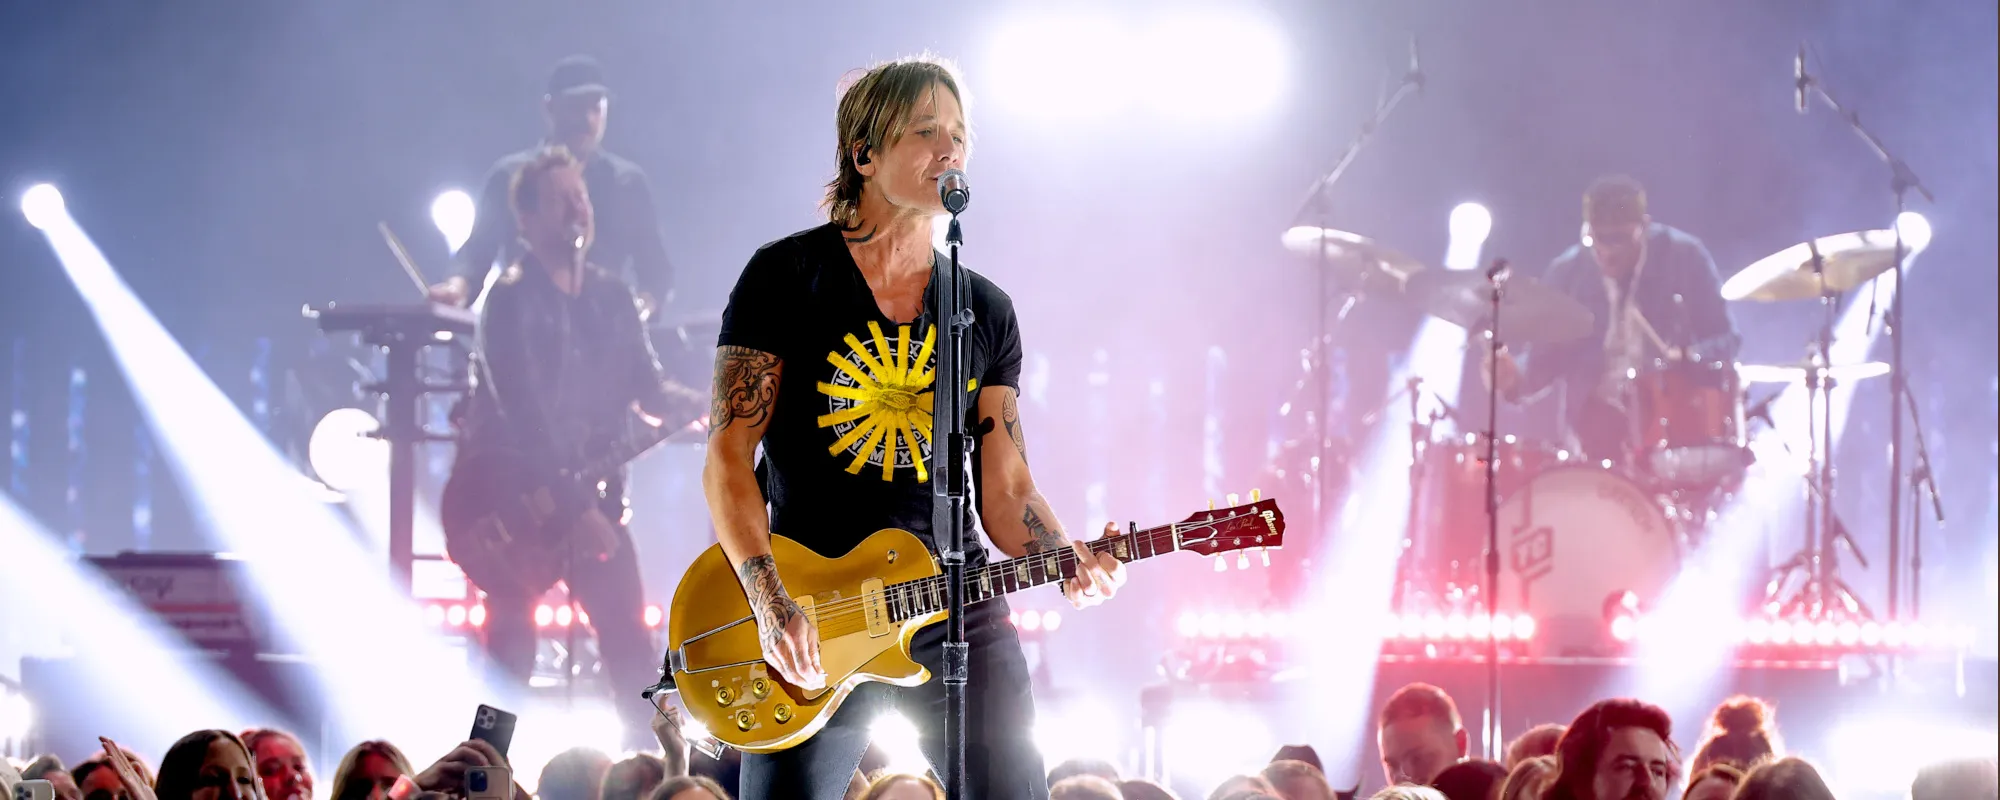 Keith Urban Opens CMT Awards With a Blast